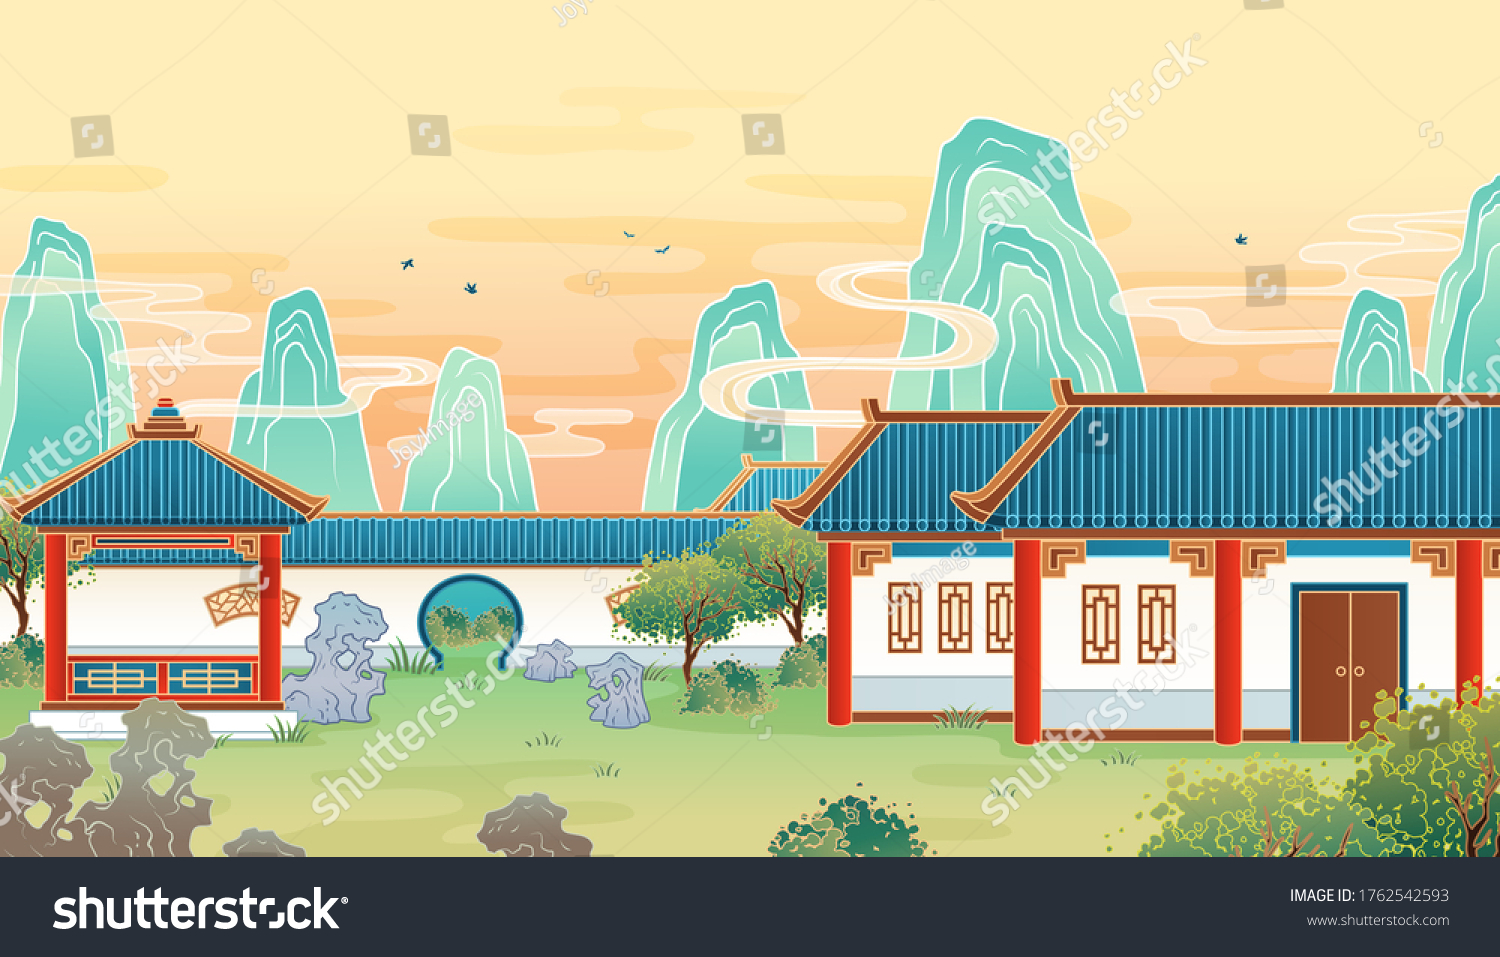 Scenic illustration of ancient Chinese garden and houses, in flat design